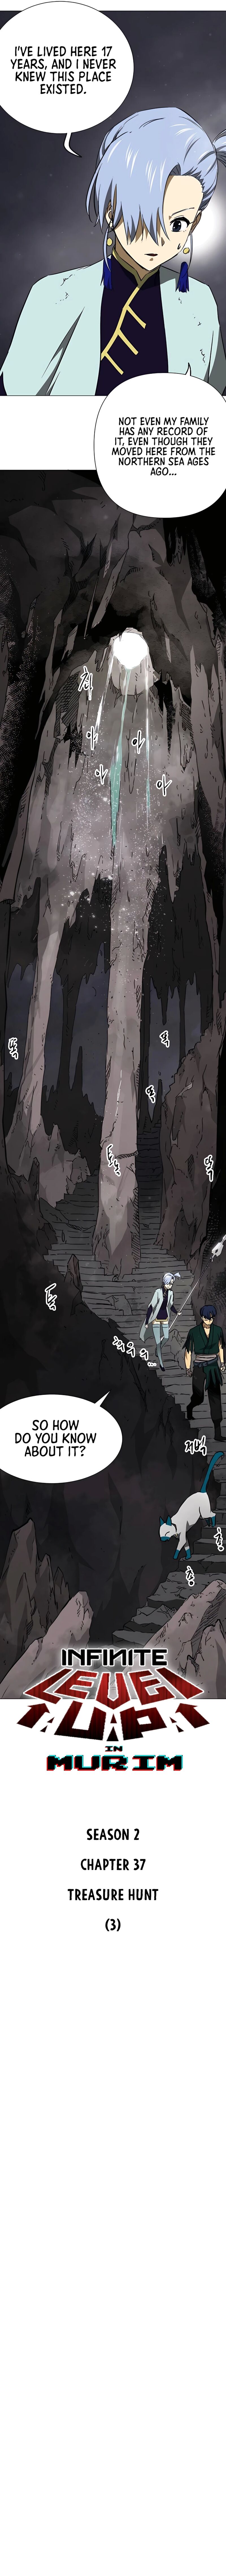 Infinite Leveling Murim Chapter 166 Page 2